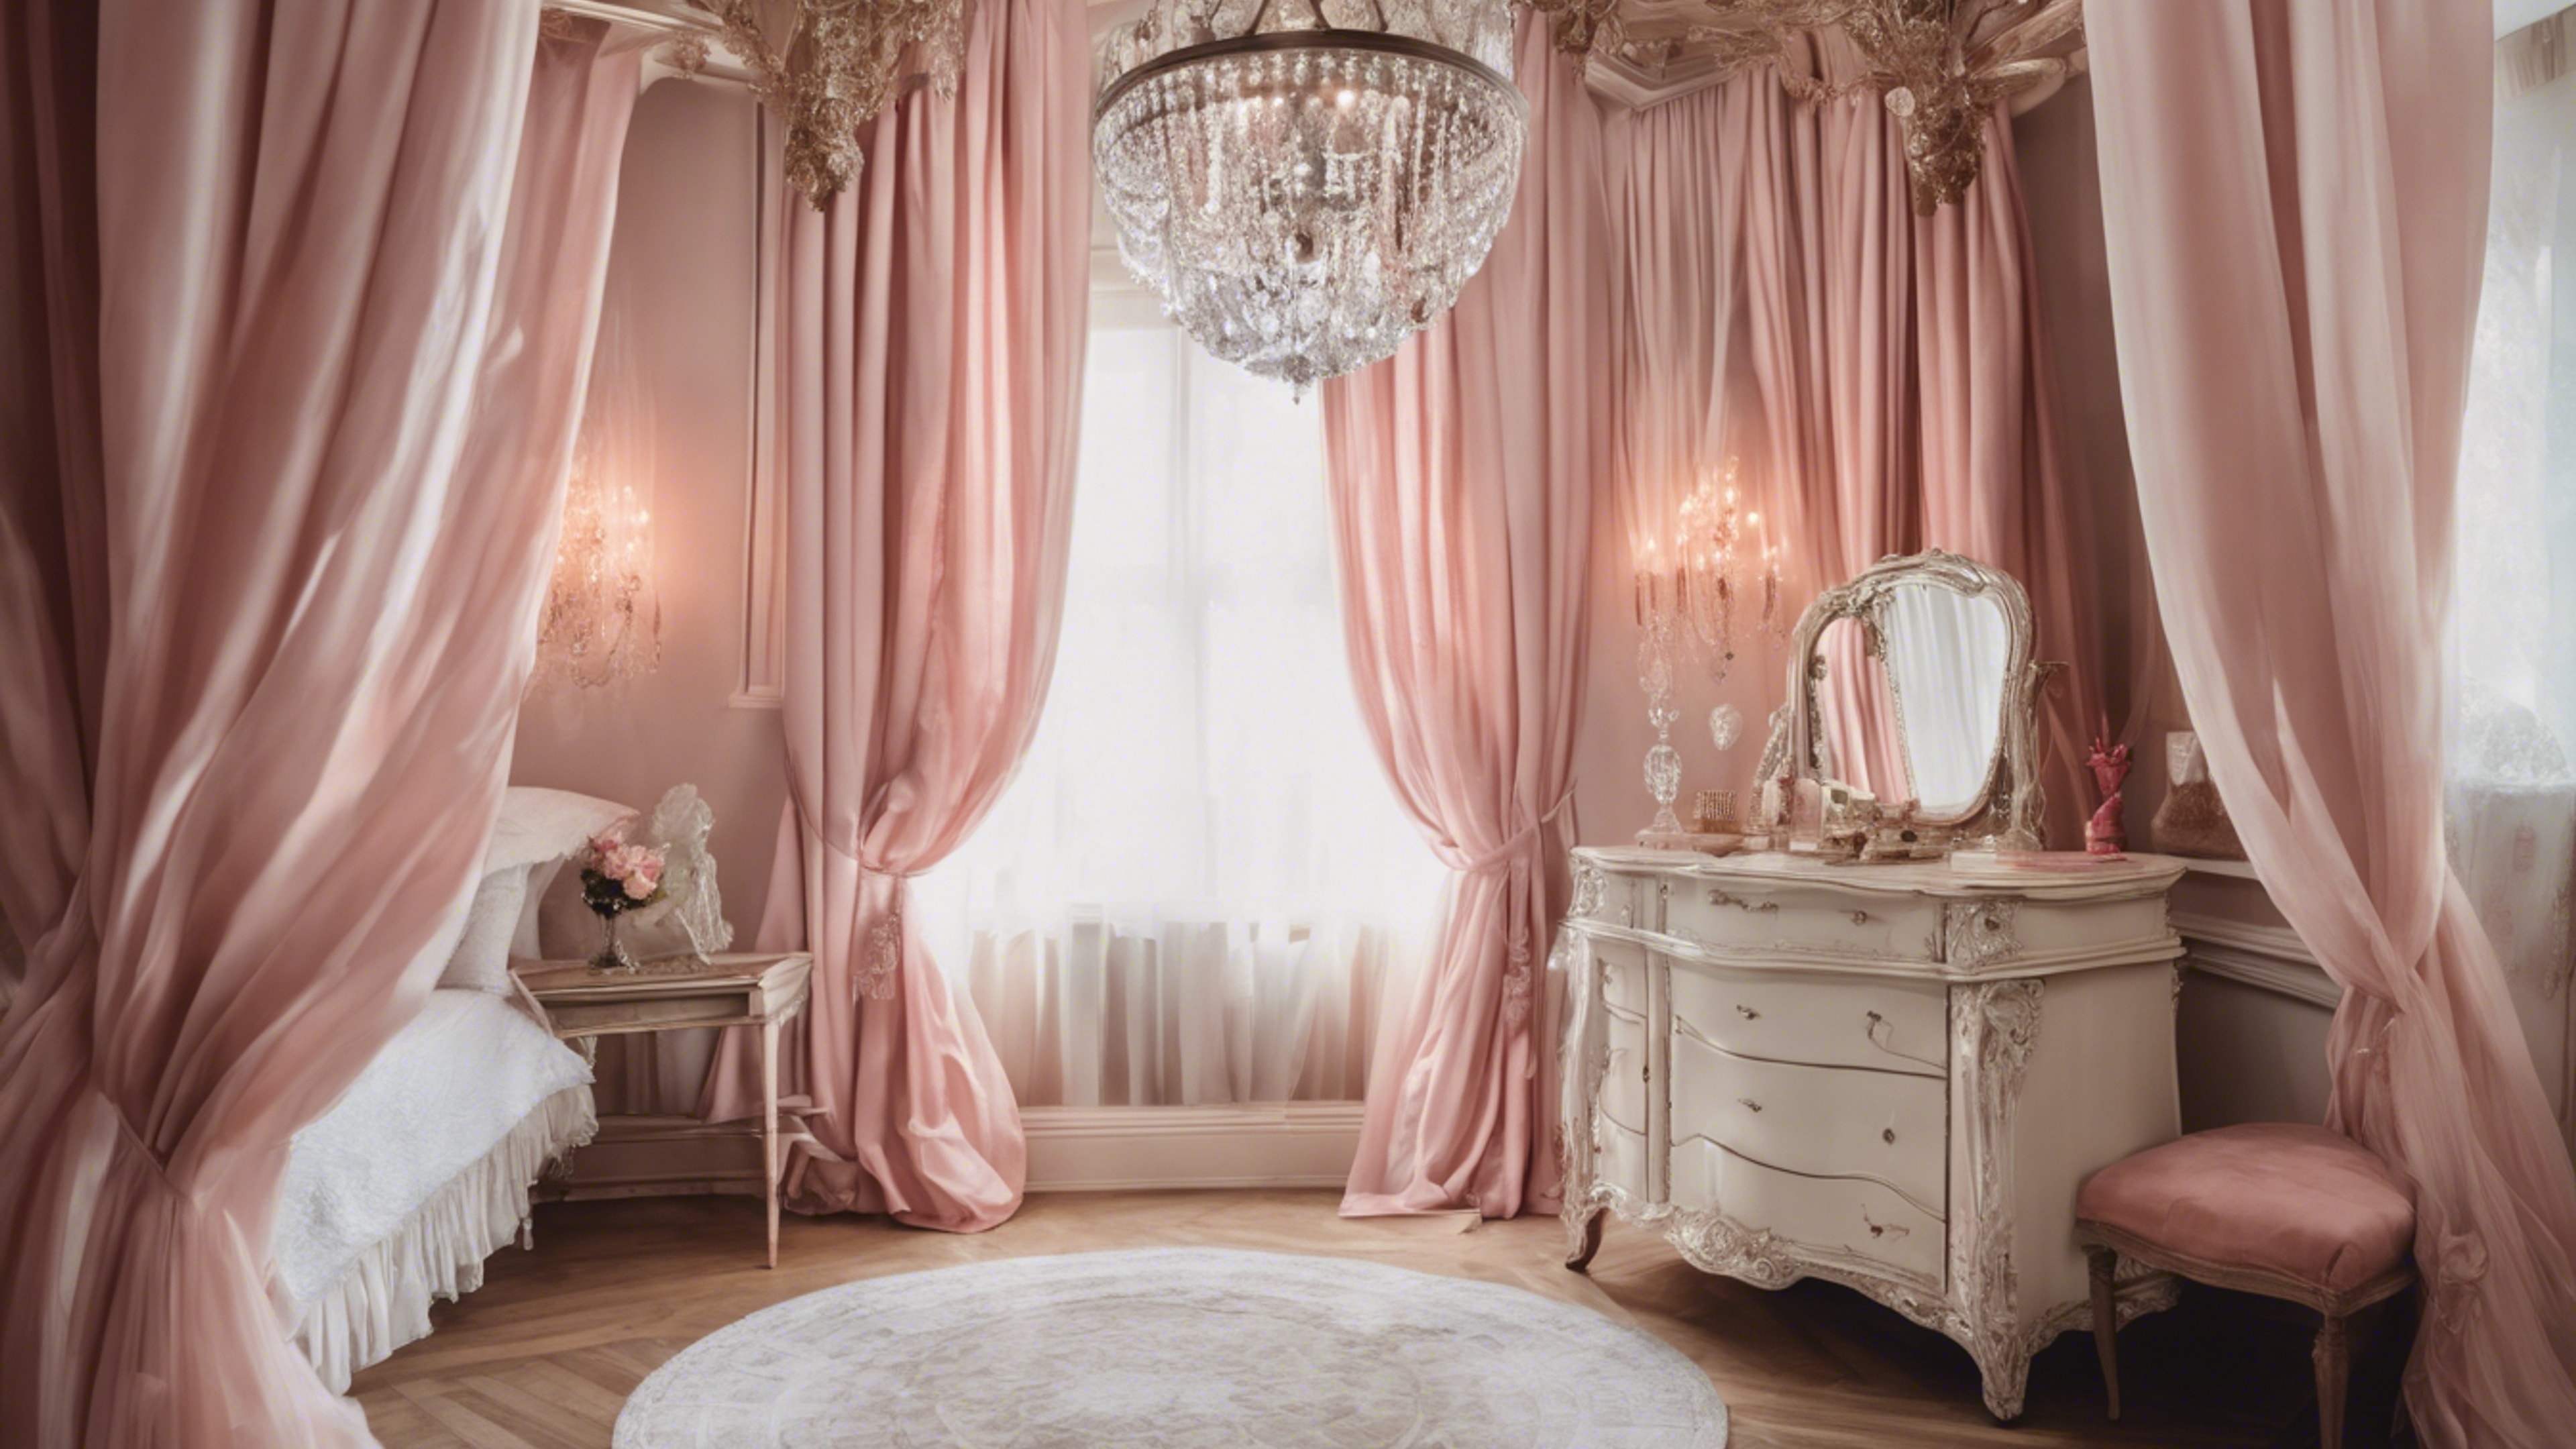 A feminine French bedroom, with canopy bed draped in soft-pink curtains, crystal chandelier hanging overhead, and an elegant antique vanity.壁紙[9a96ceac1df24dd59ae9]